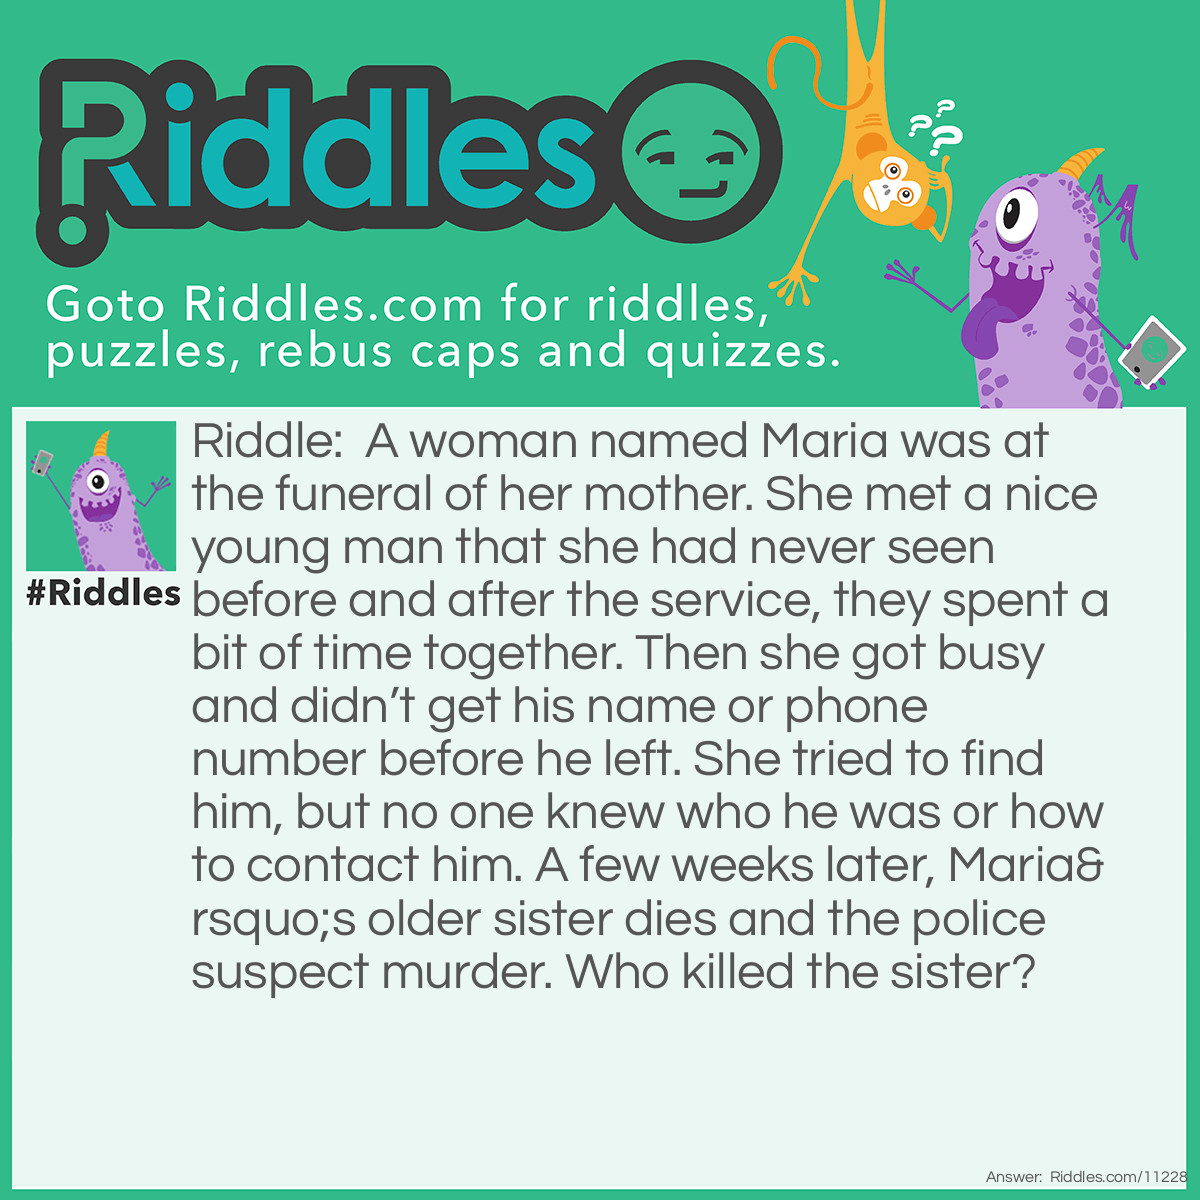 Riddle: A woman named Maria was at the funeral of her mother. She met a nice young man that she had never seen before and after the service, they spent a bit of time together. Then she got busy and didn’t get his name or phone number before he left. She tried to find him, but no one knew who he was or how to contact him. A few weeks later, Maria’s older sister dies and the police suspect murder. Who killed the sister? Answer: Maria. She hoped the man would show up at her sister’s funeral just as he had for her mother’s funeral.